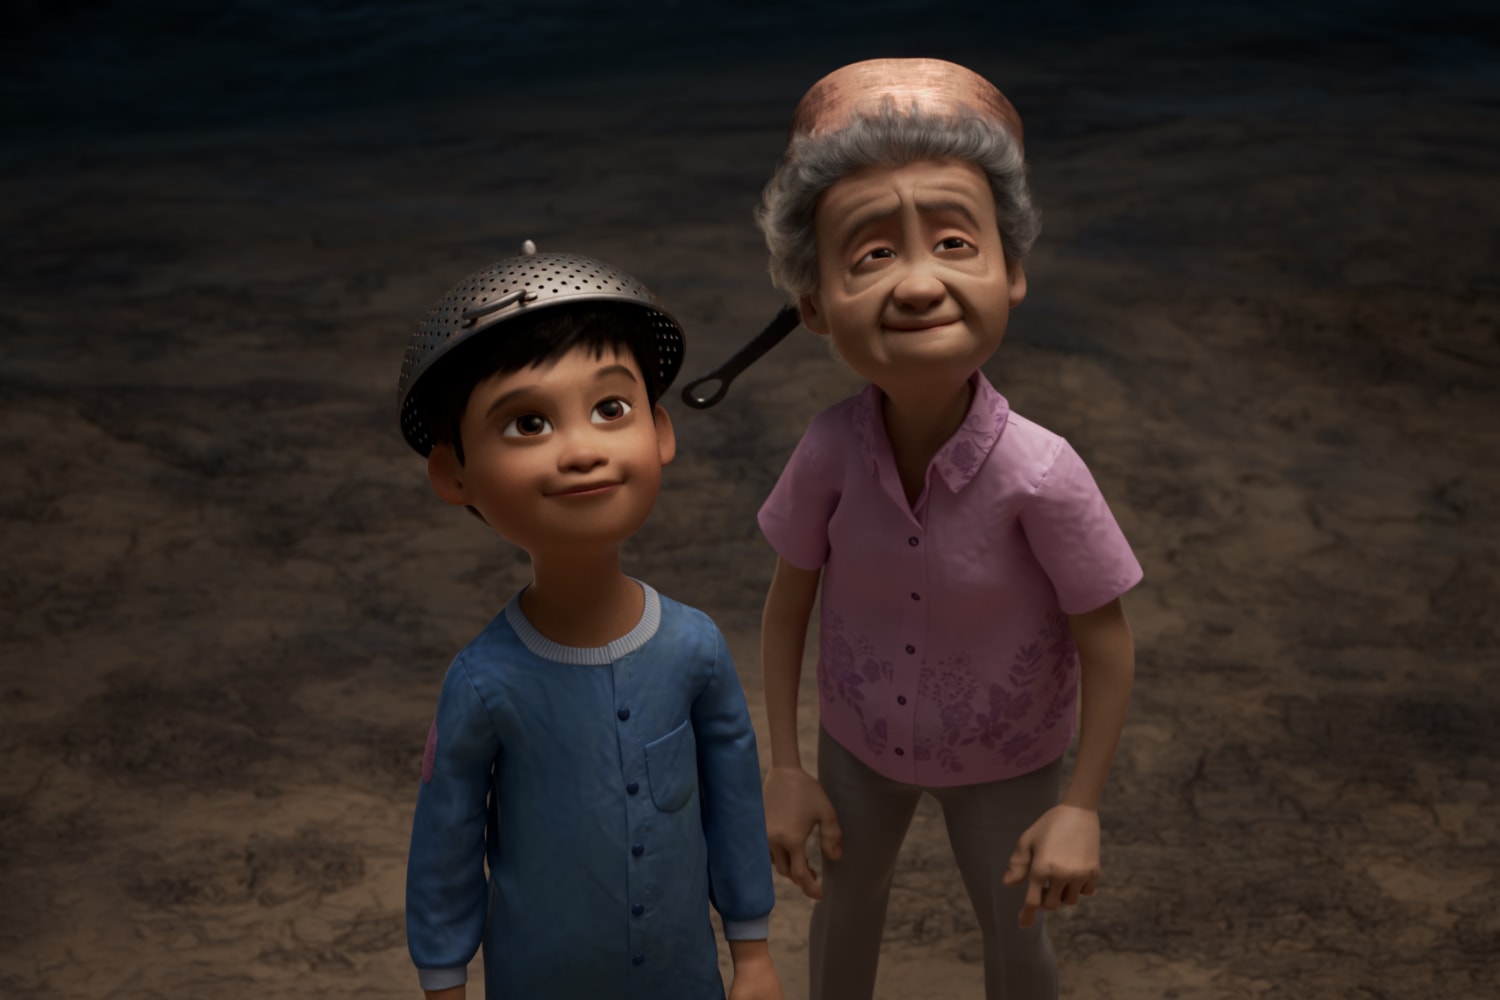 A Pixar engineer became a director to tell his immigration story in 'Wind' on Disney+